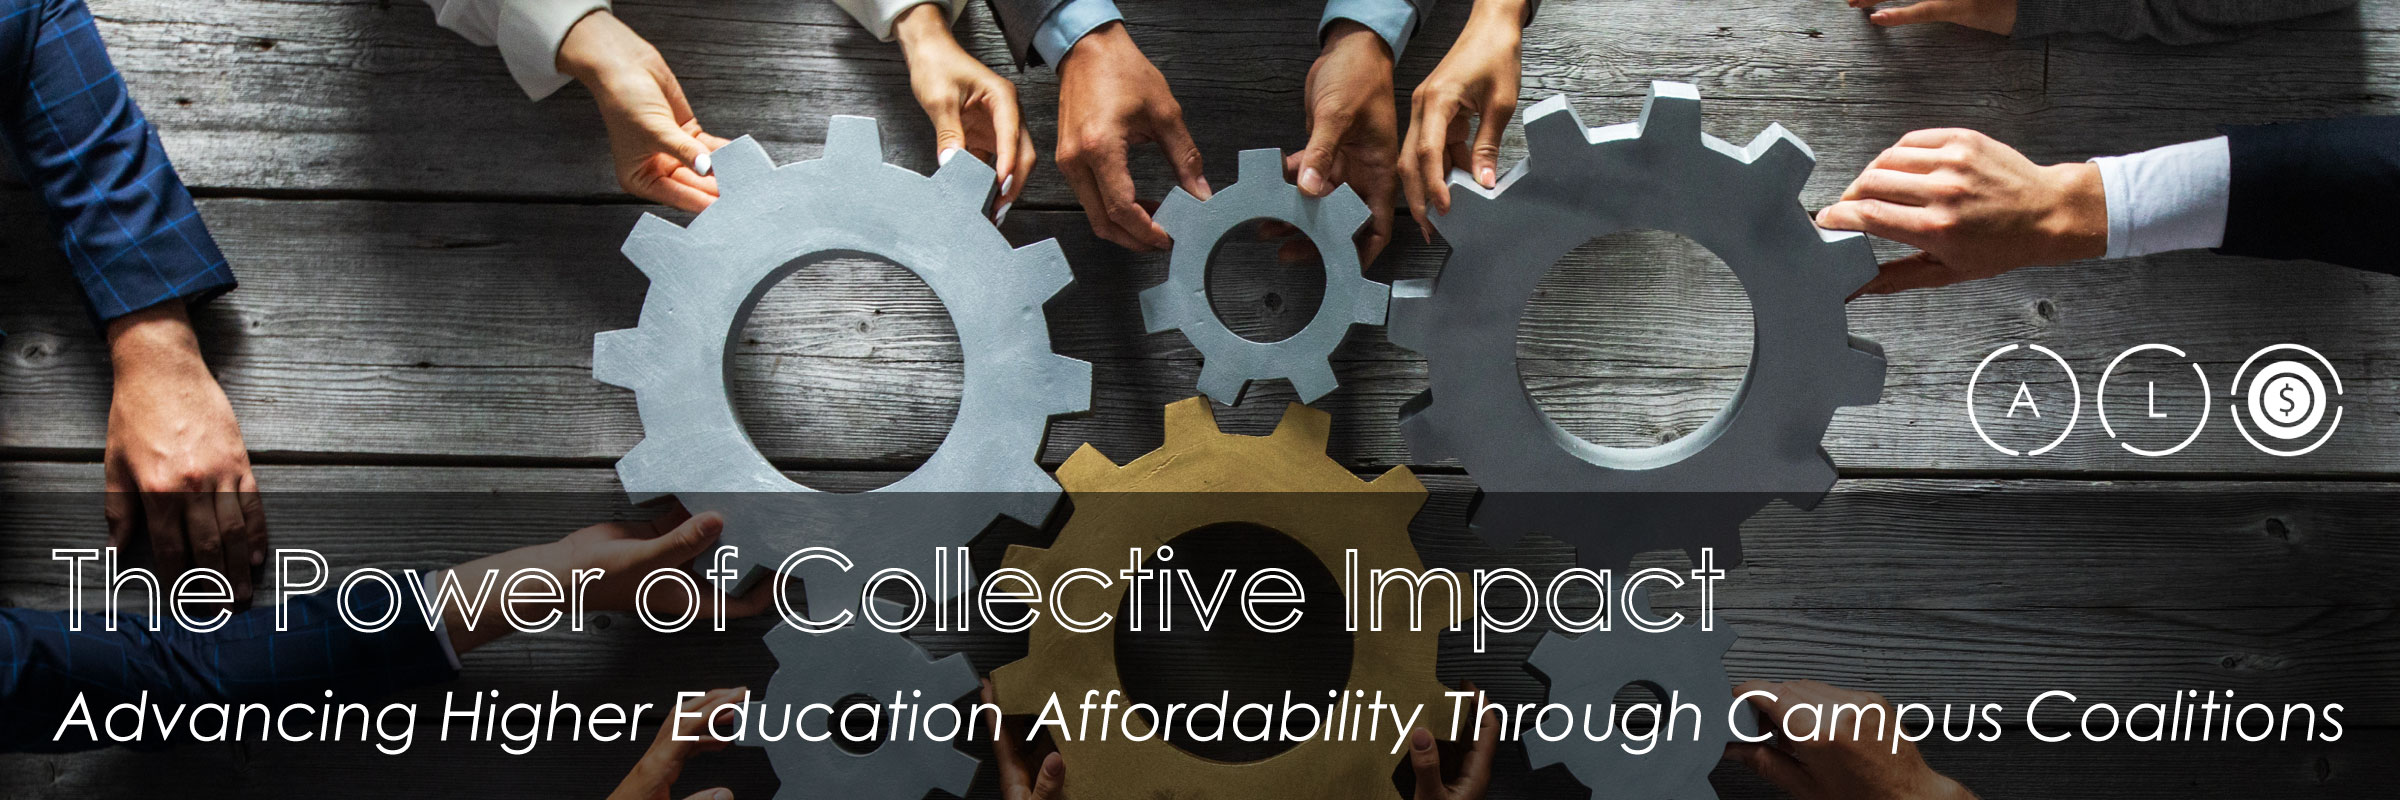 The Power of Collective Impact: Advancing Higher Education Affordability Through Campus Coalitions